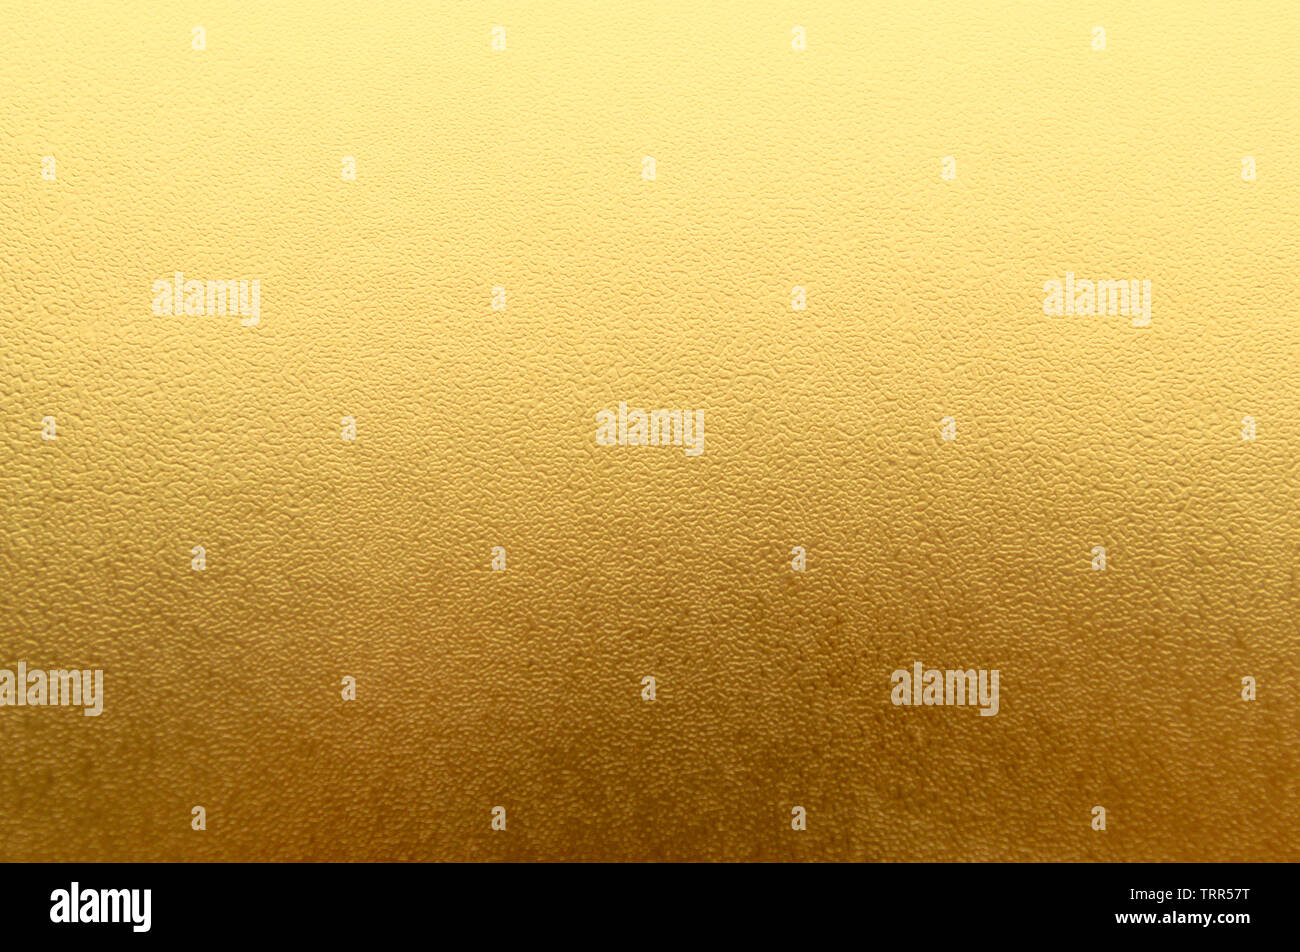 Golden Aluminum Foil Texture Background Stock Photo, Picture and